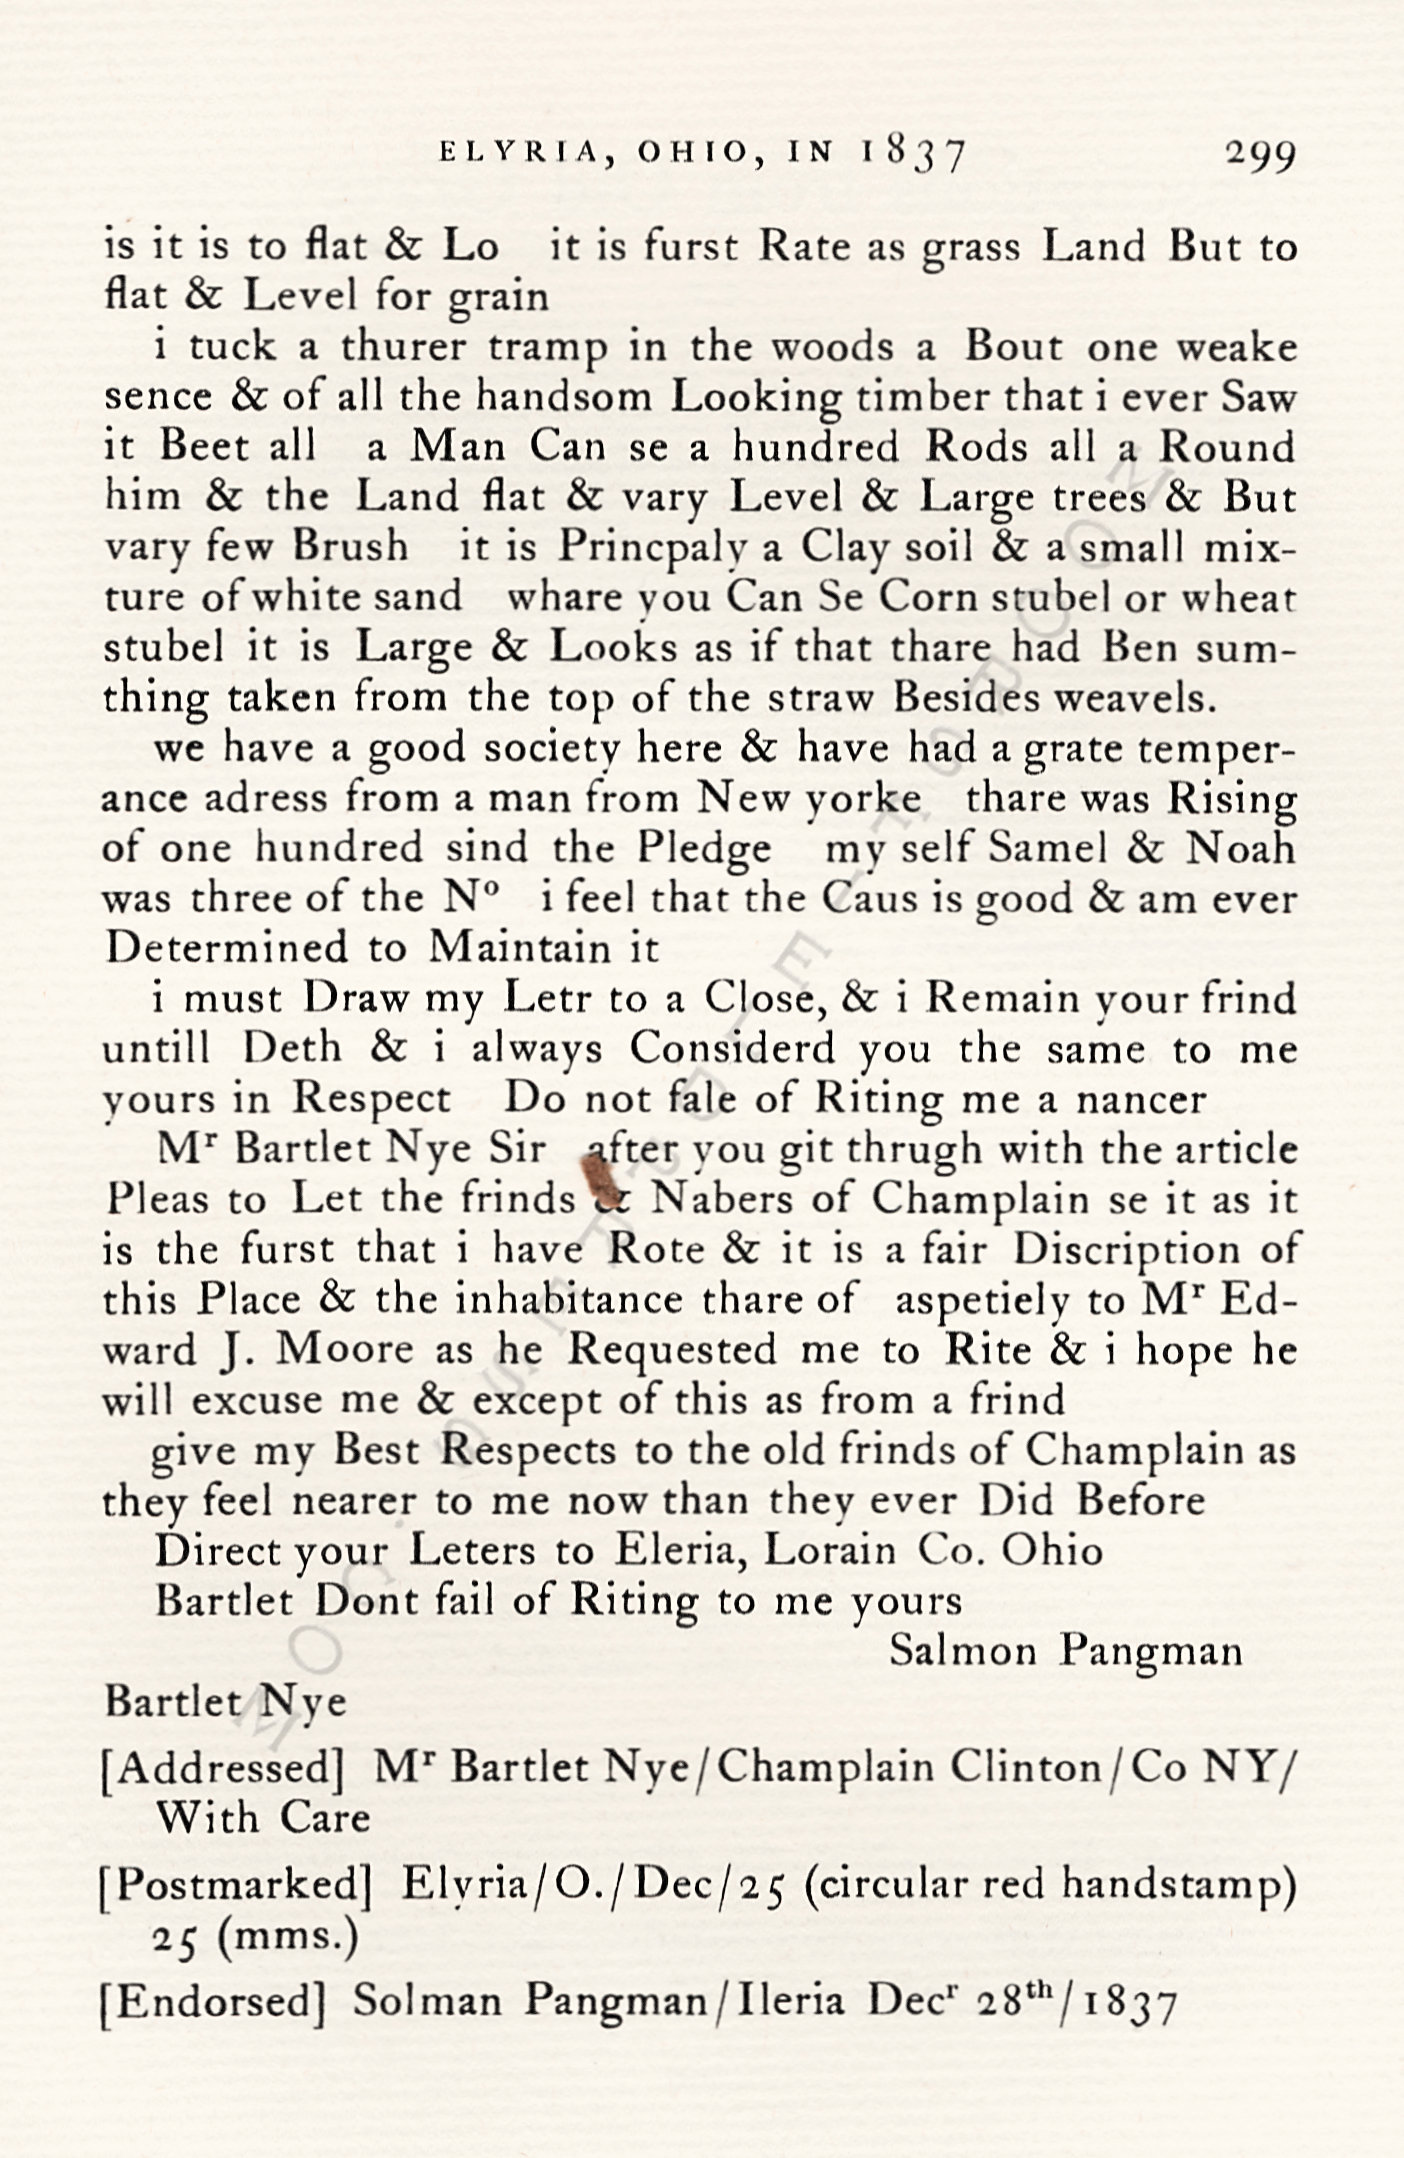 A Letter
                      From Elyria Ohio In 1837-Salmon Pangman to
                      Bartlett Nye of Champlain, New York